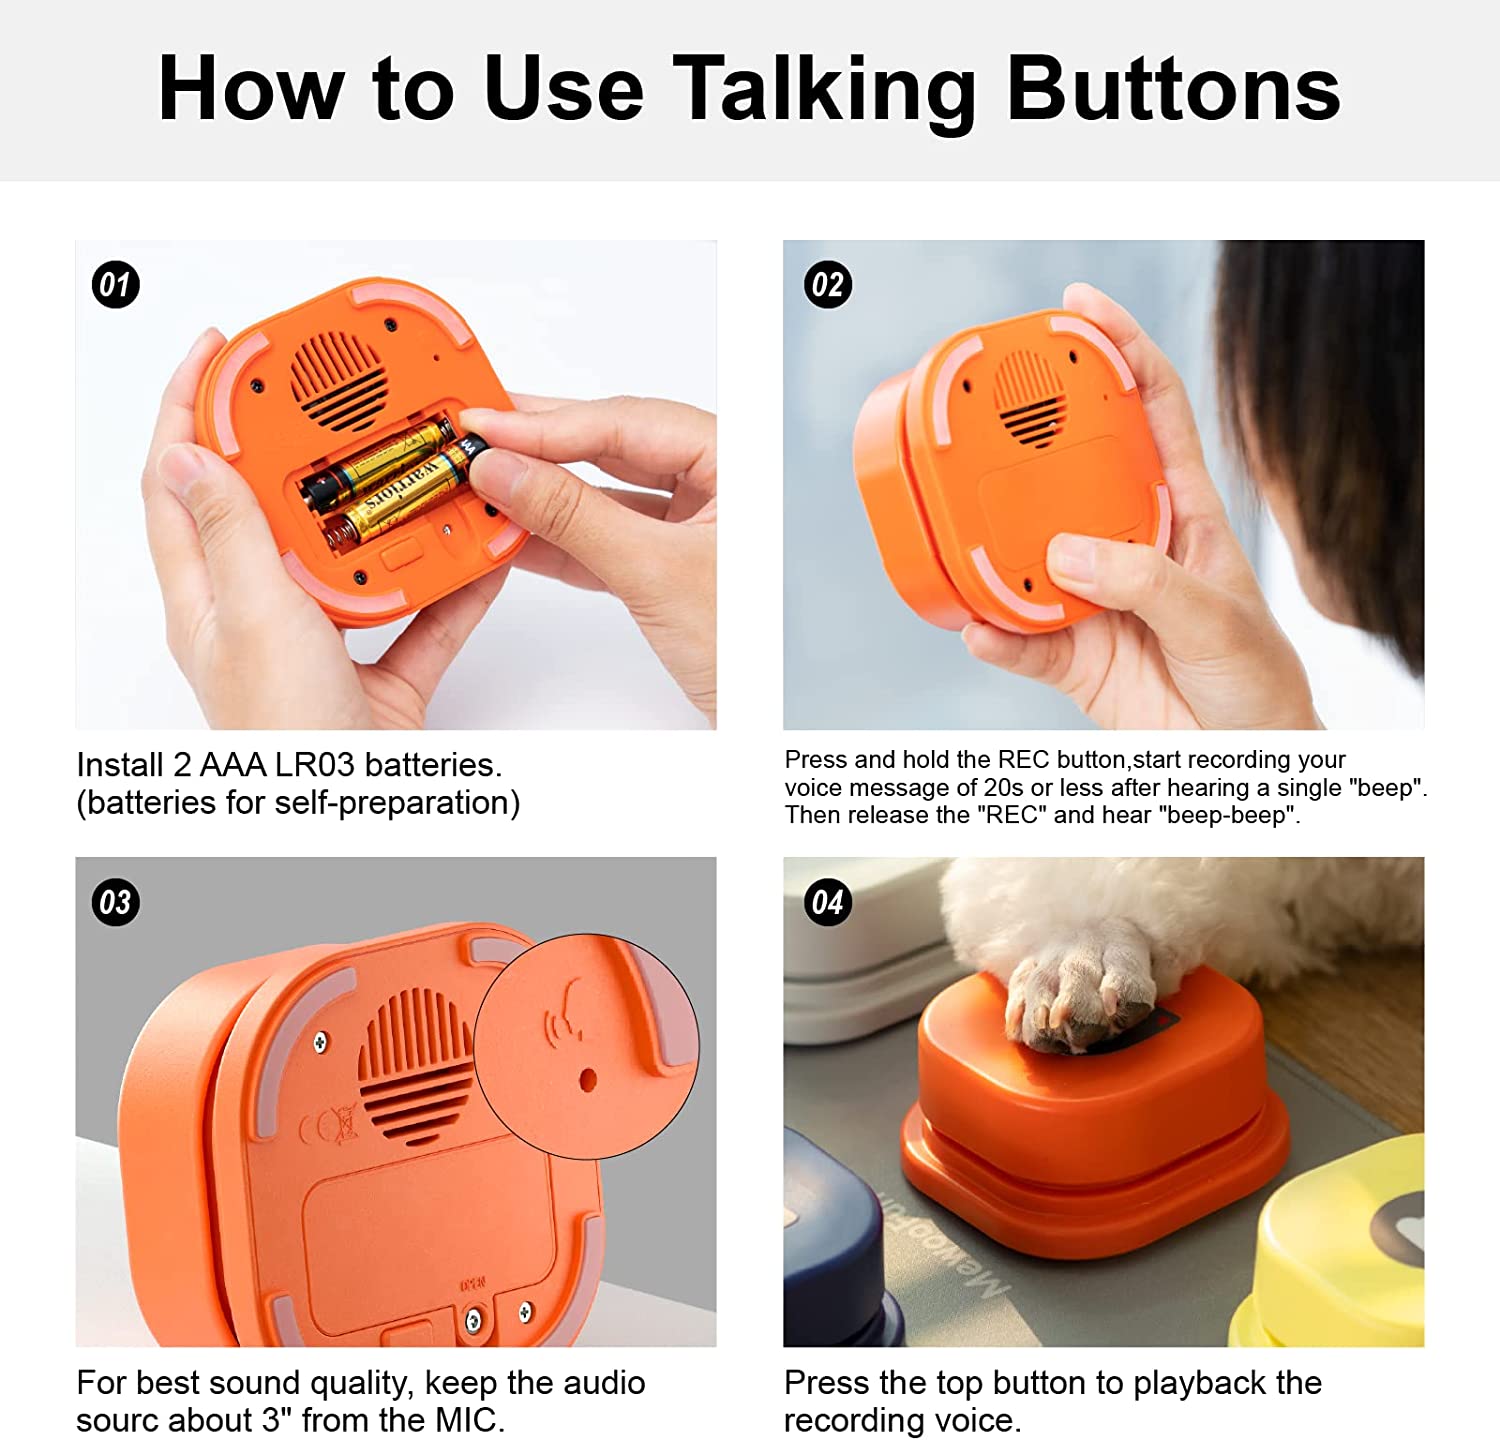 Interactive Pet Vocal Buttons for Training